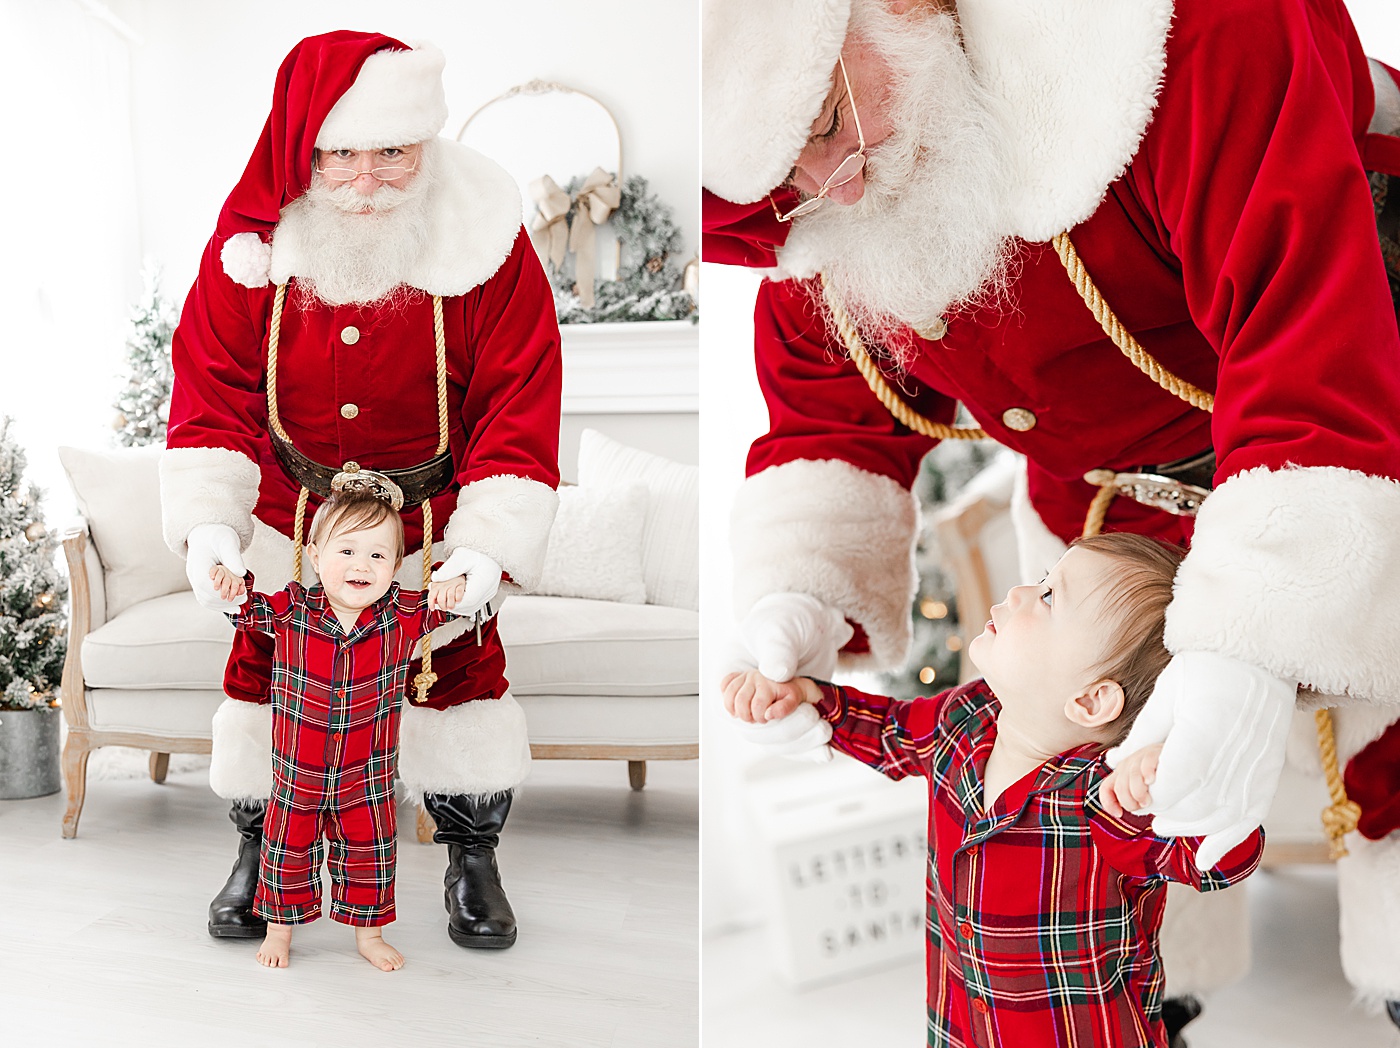 Baby's first Christmas and meeting Santa | Kristin Wood Photography